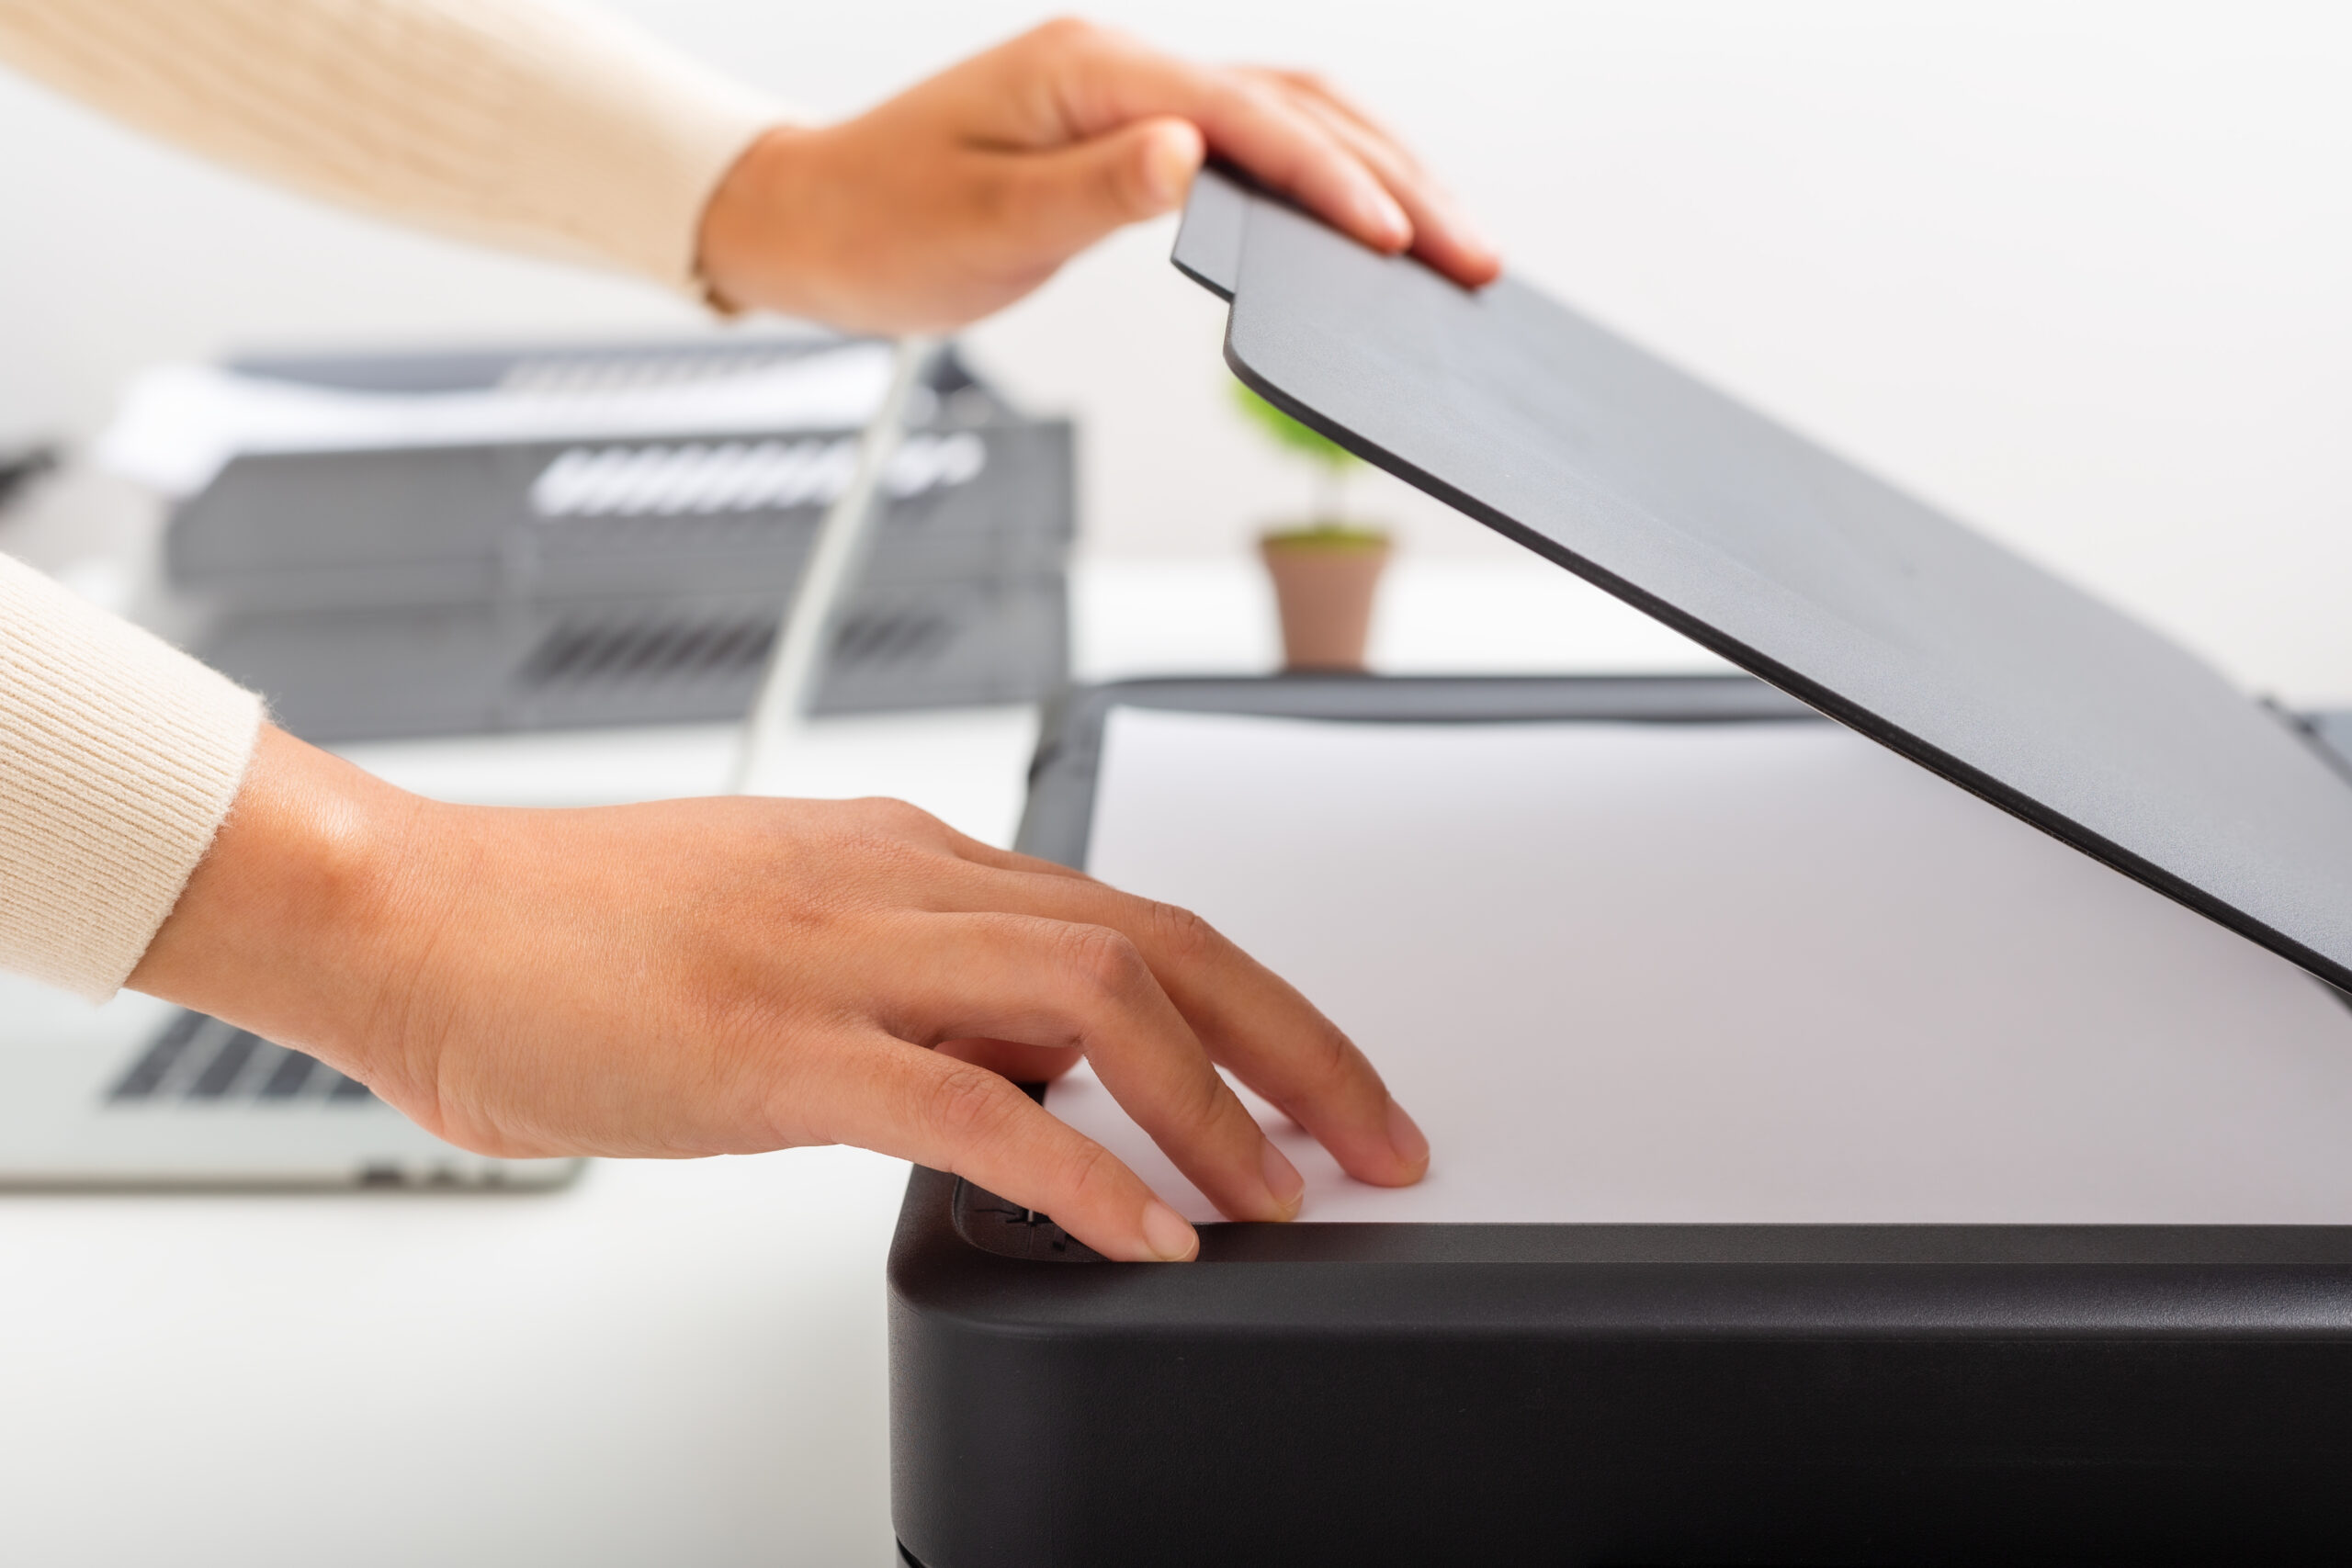 Learn about the key differences between document capture and document management